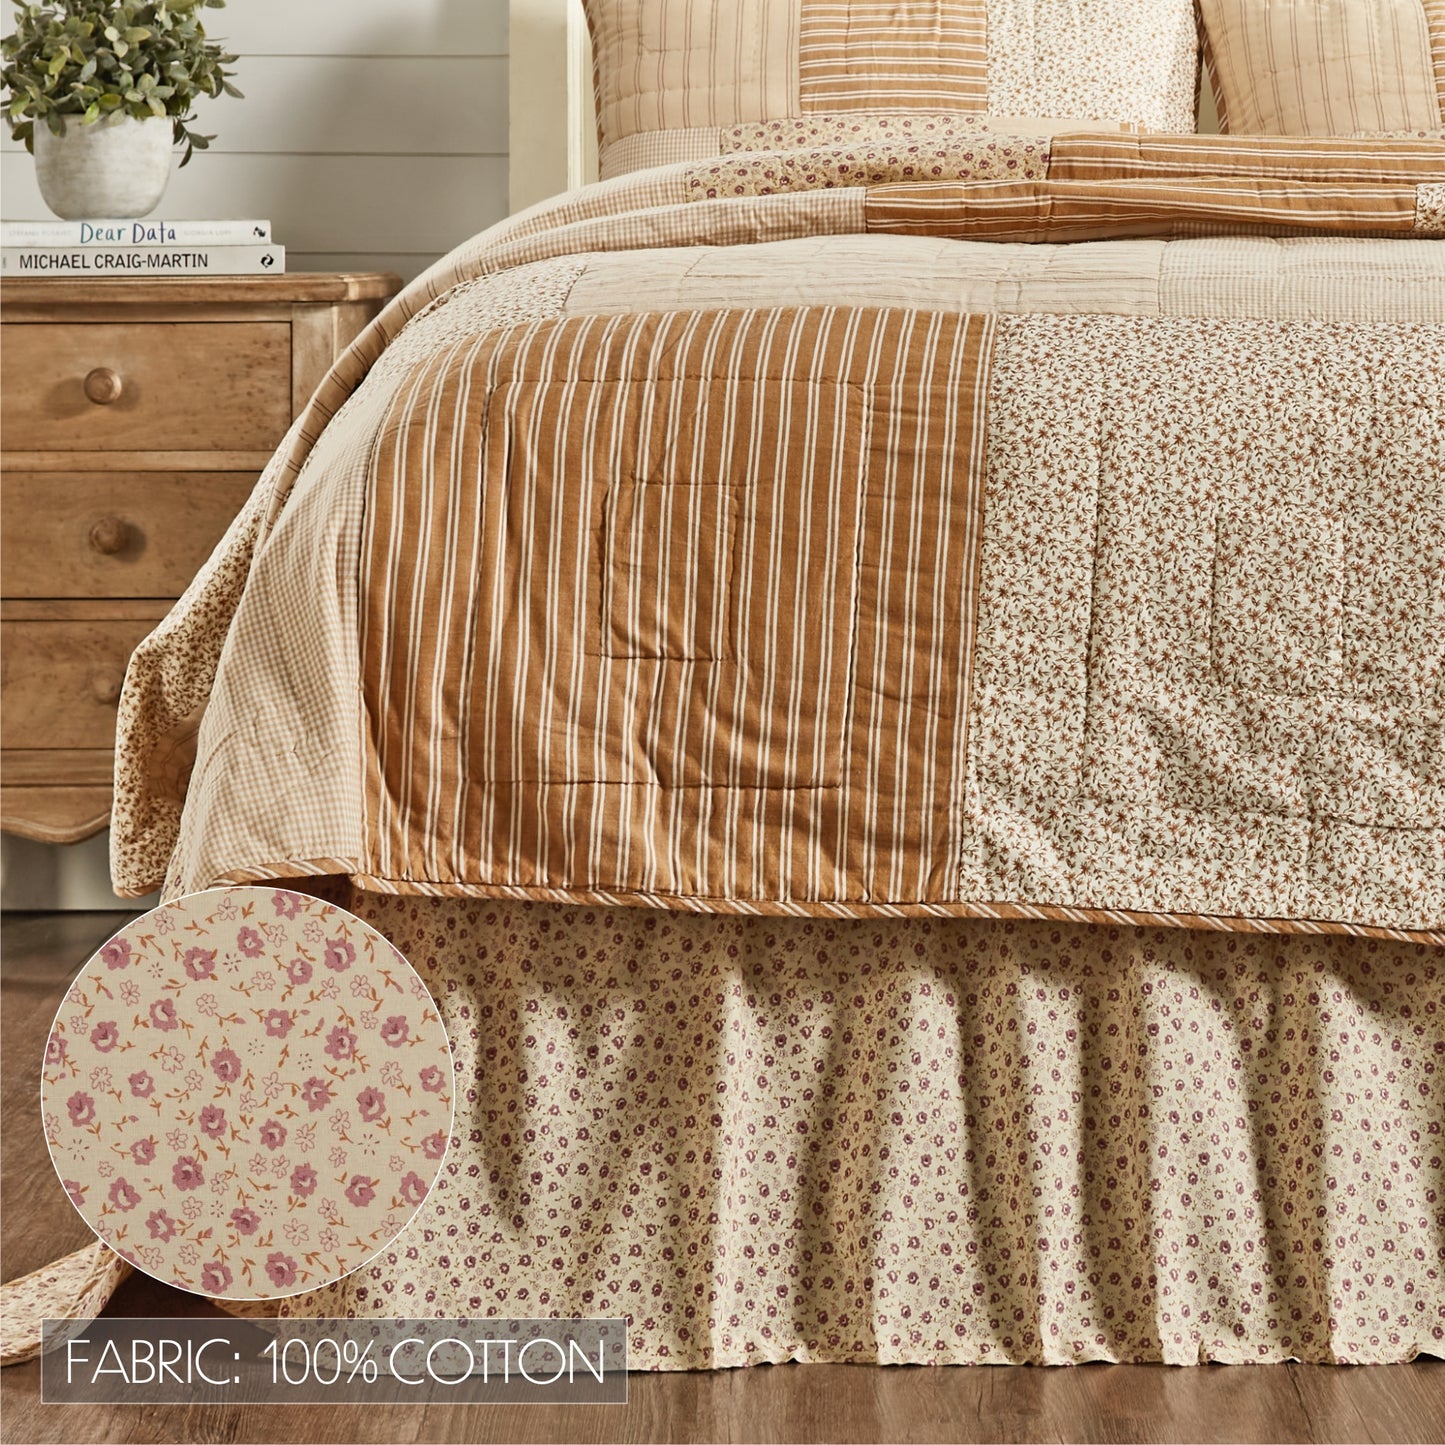 VHC Brands Camilia Queen Quilt Shams and Bed Skirt SPEND $200 - GET 20% OFF